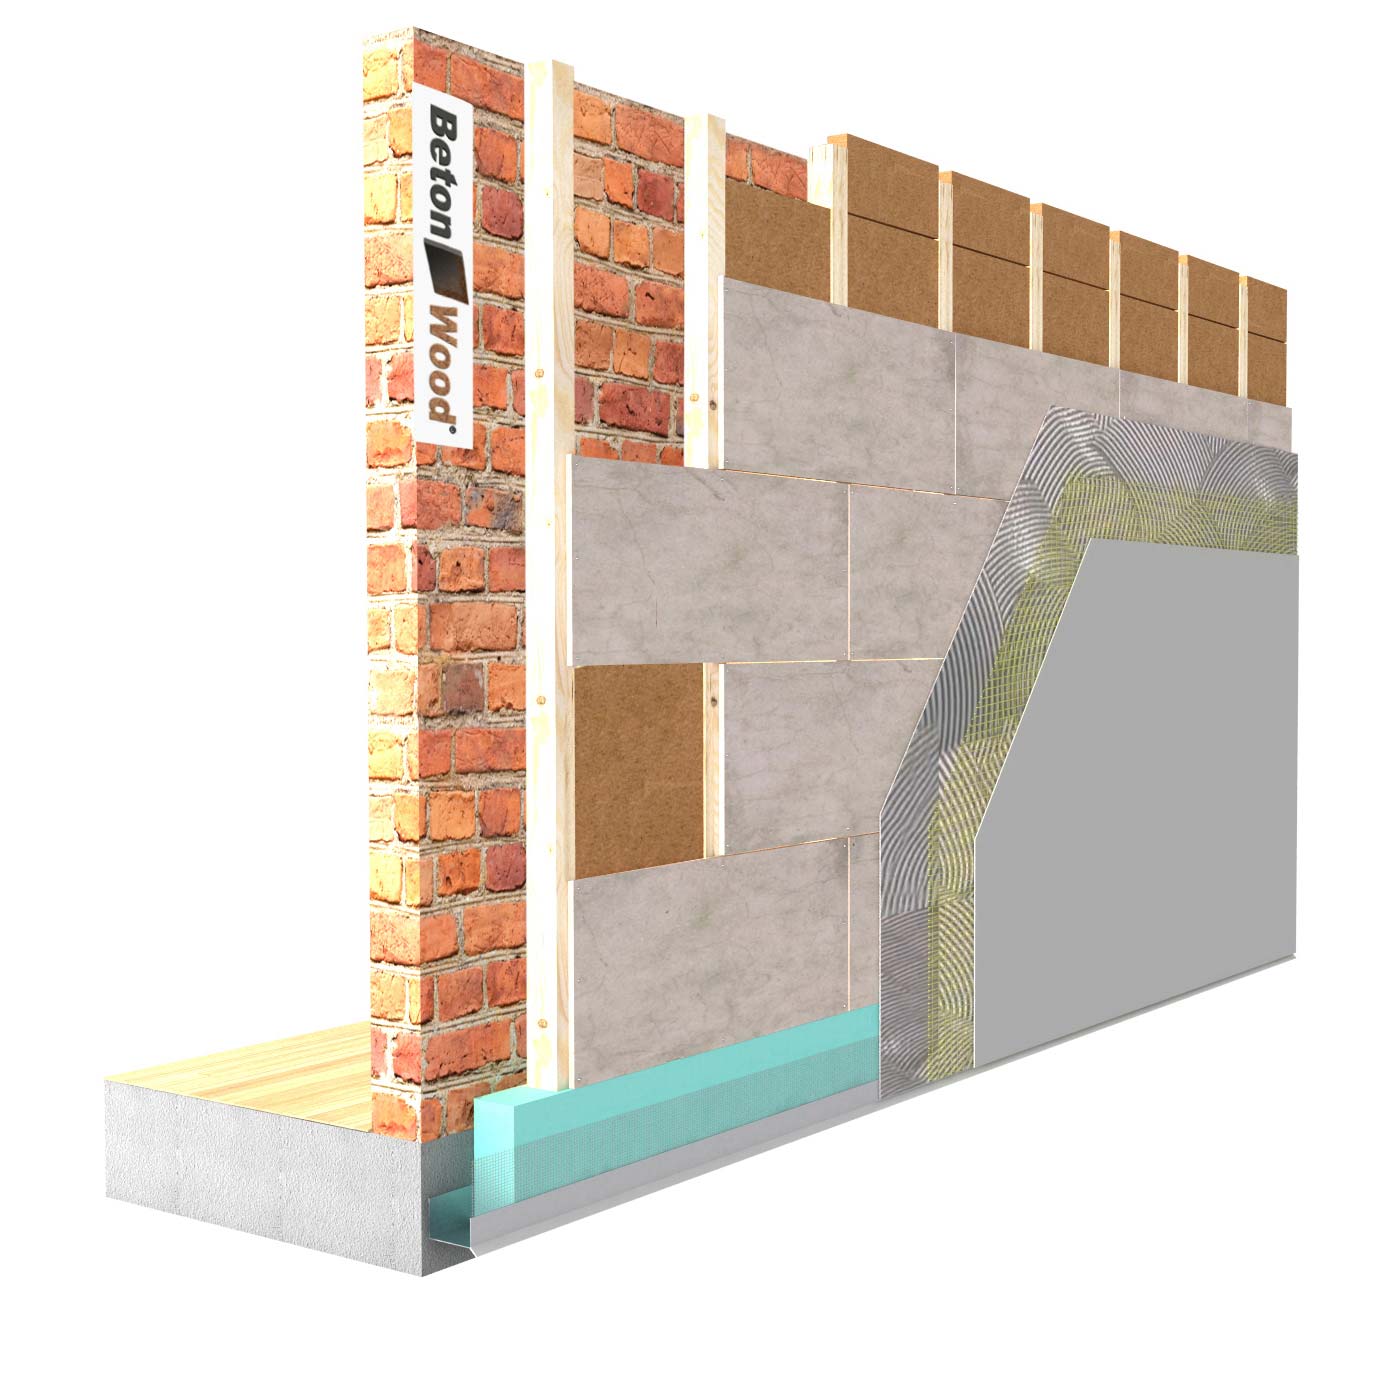 External insulation system with Protect wood fibre board on masonry